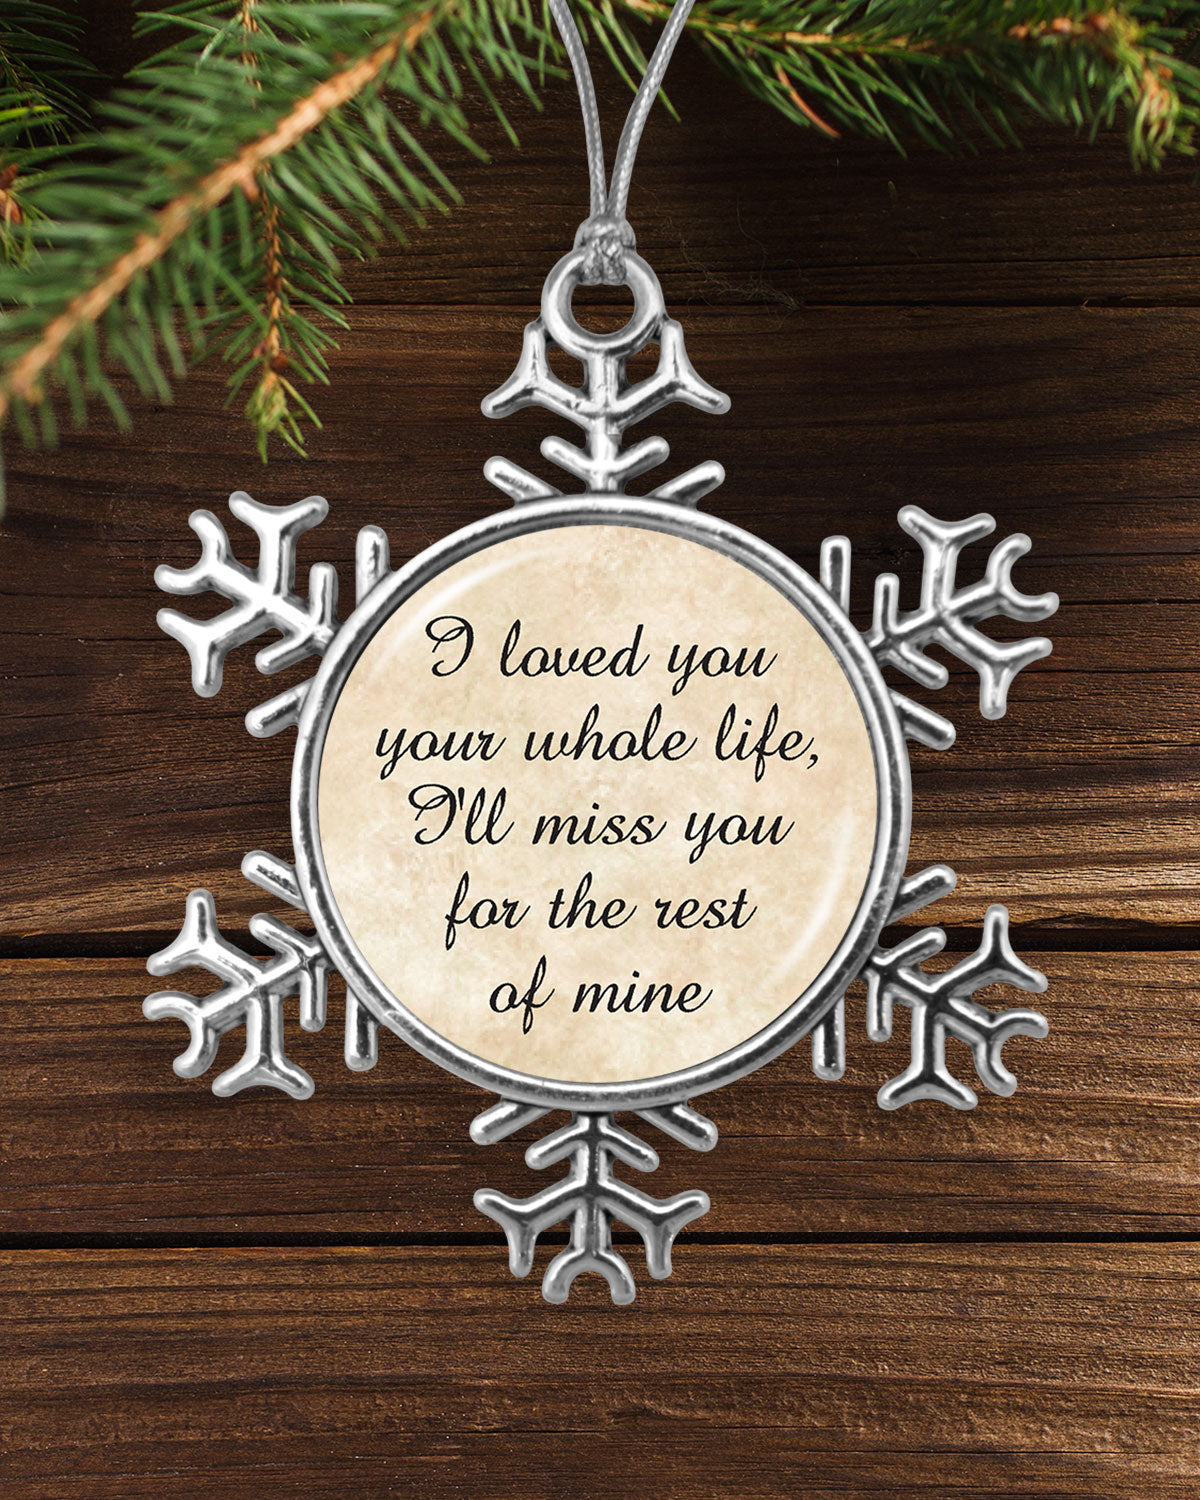 I Have Loved You Your Whole Life Snowflake Ornament